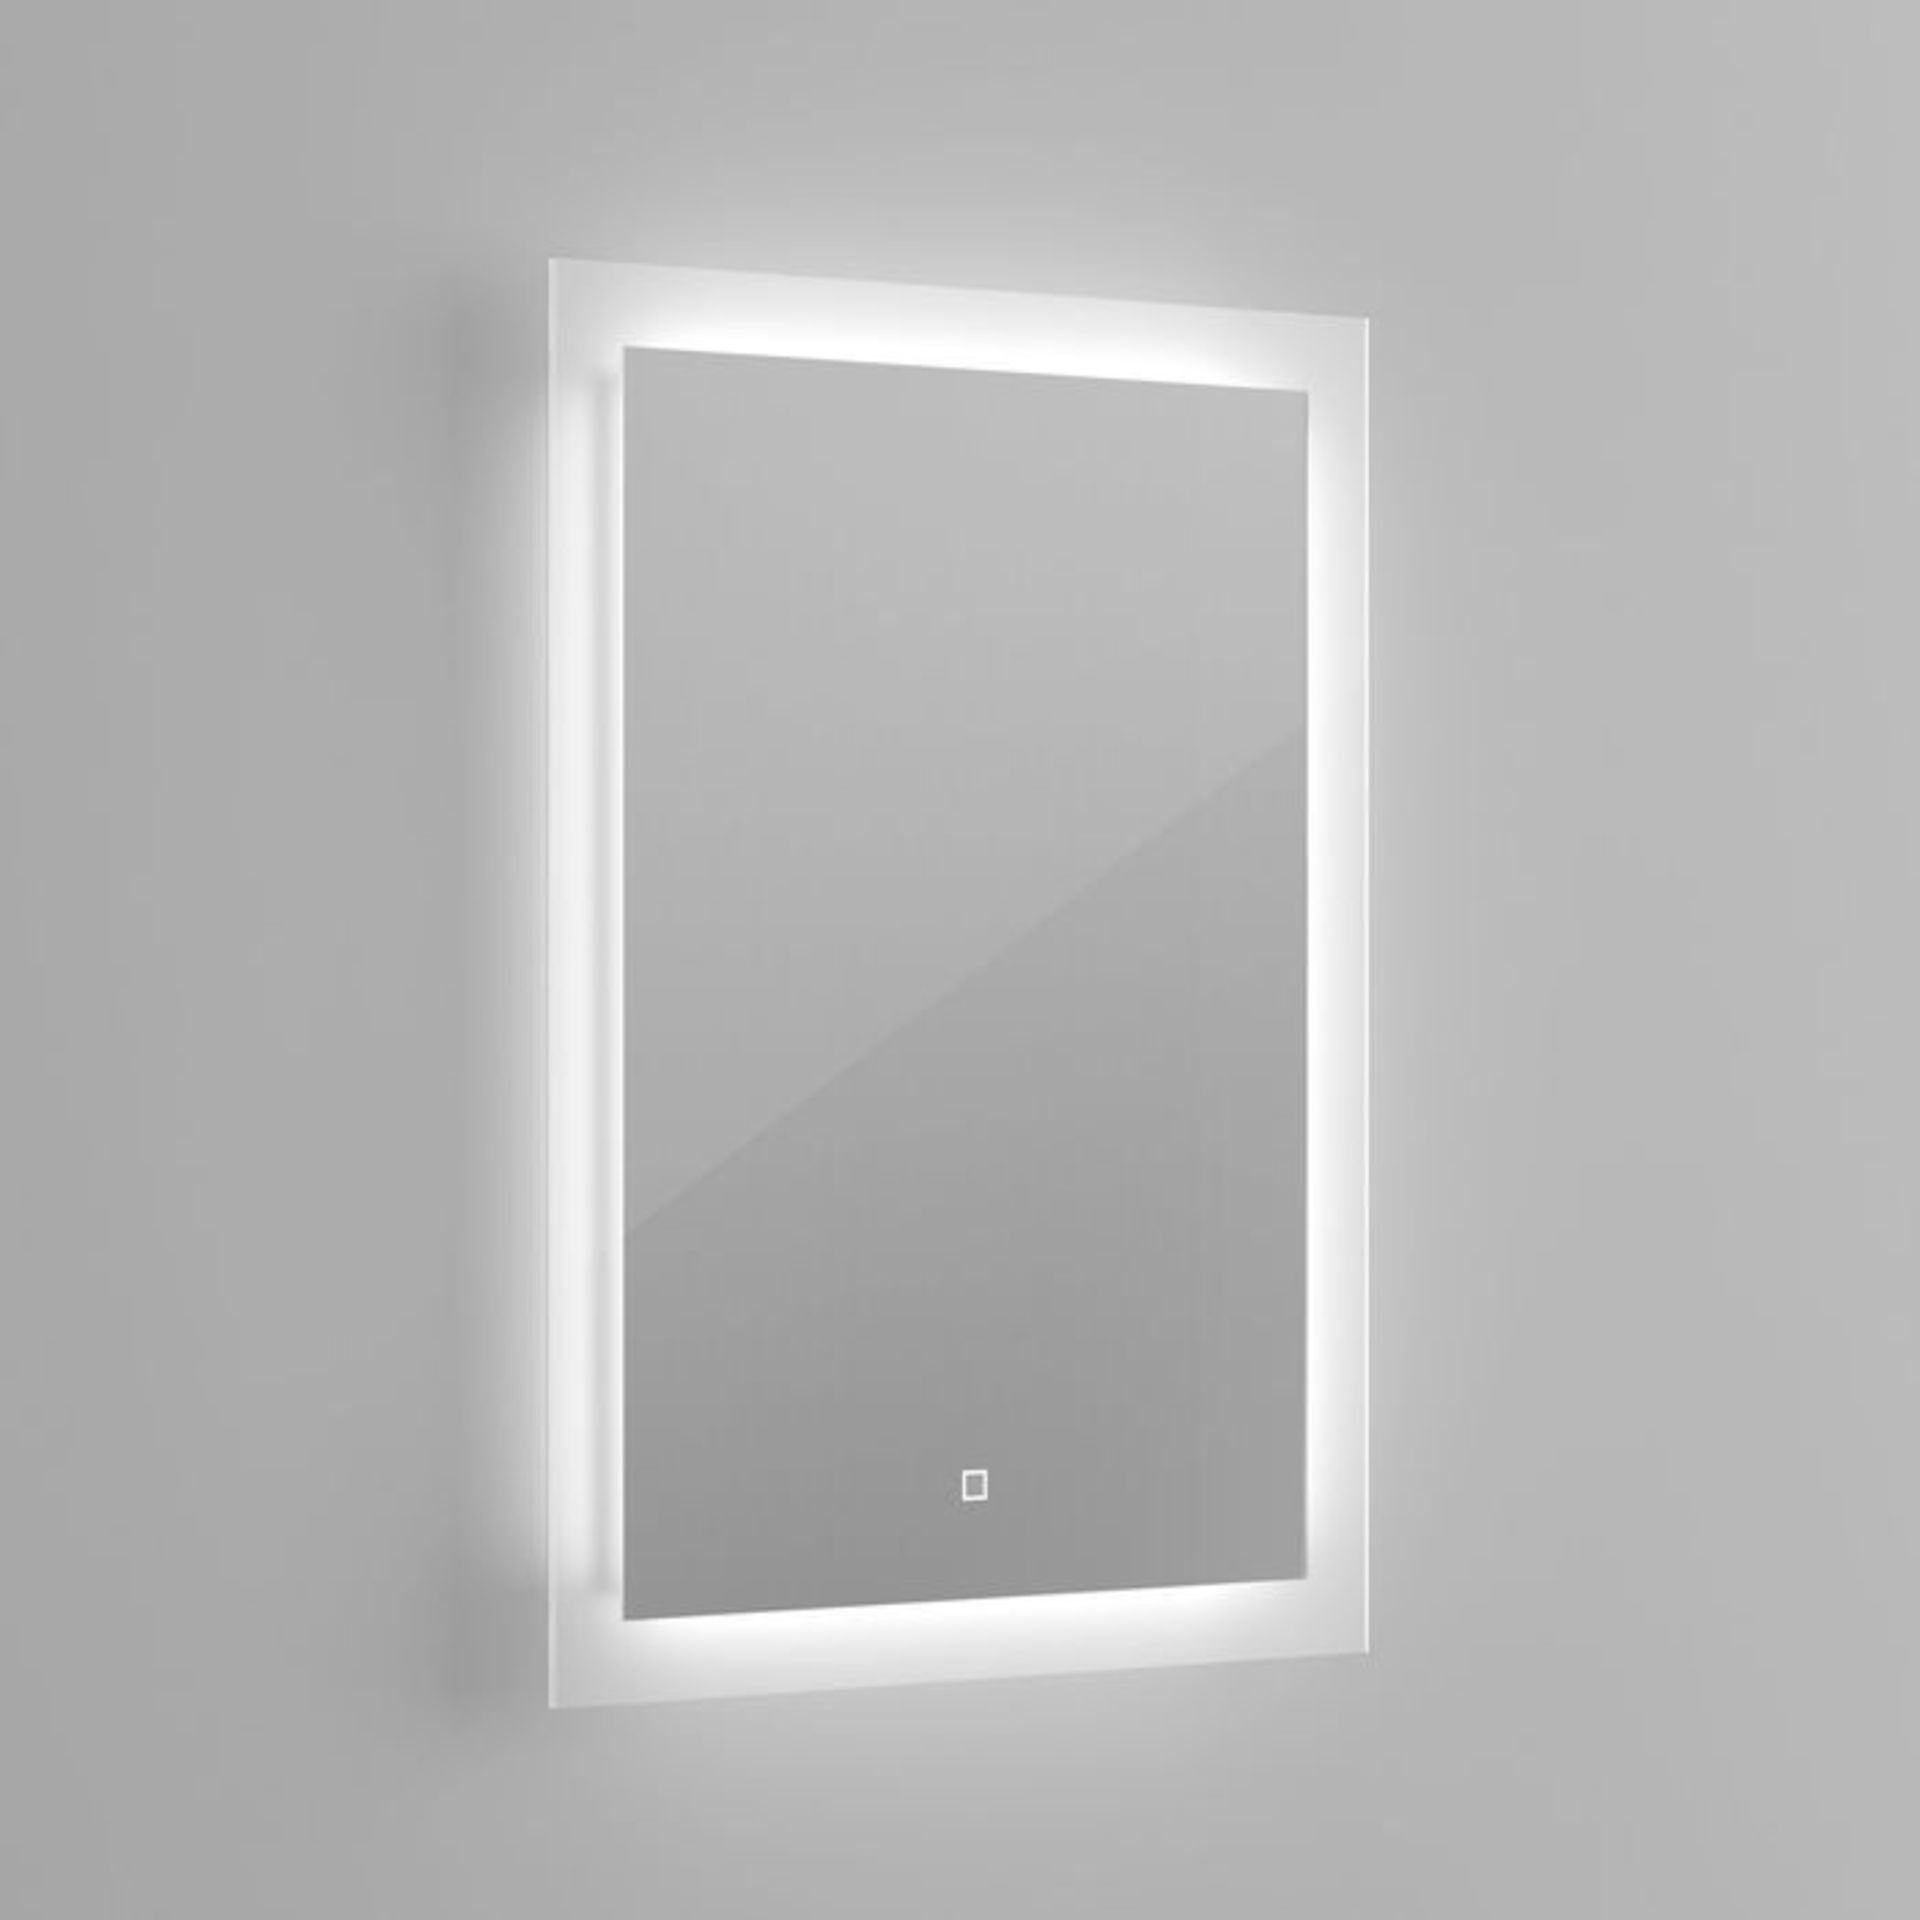 (Y55) 700x500mm Orion Illuminated LED Mirror - Switch Control.RRP £349.99. Energy efficient LED - Image 5 of 6